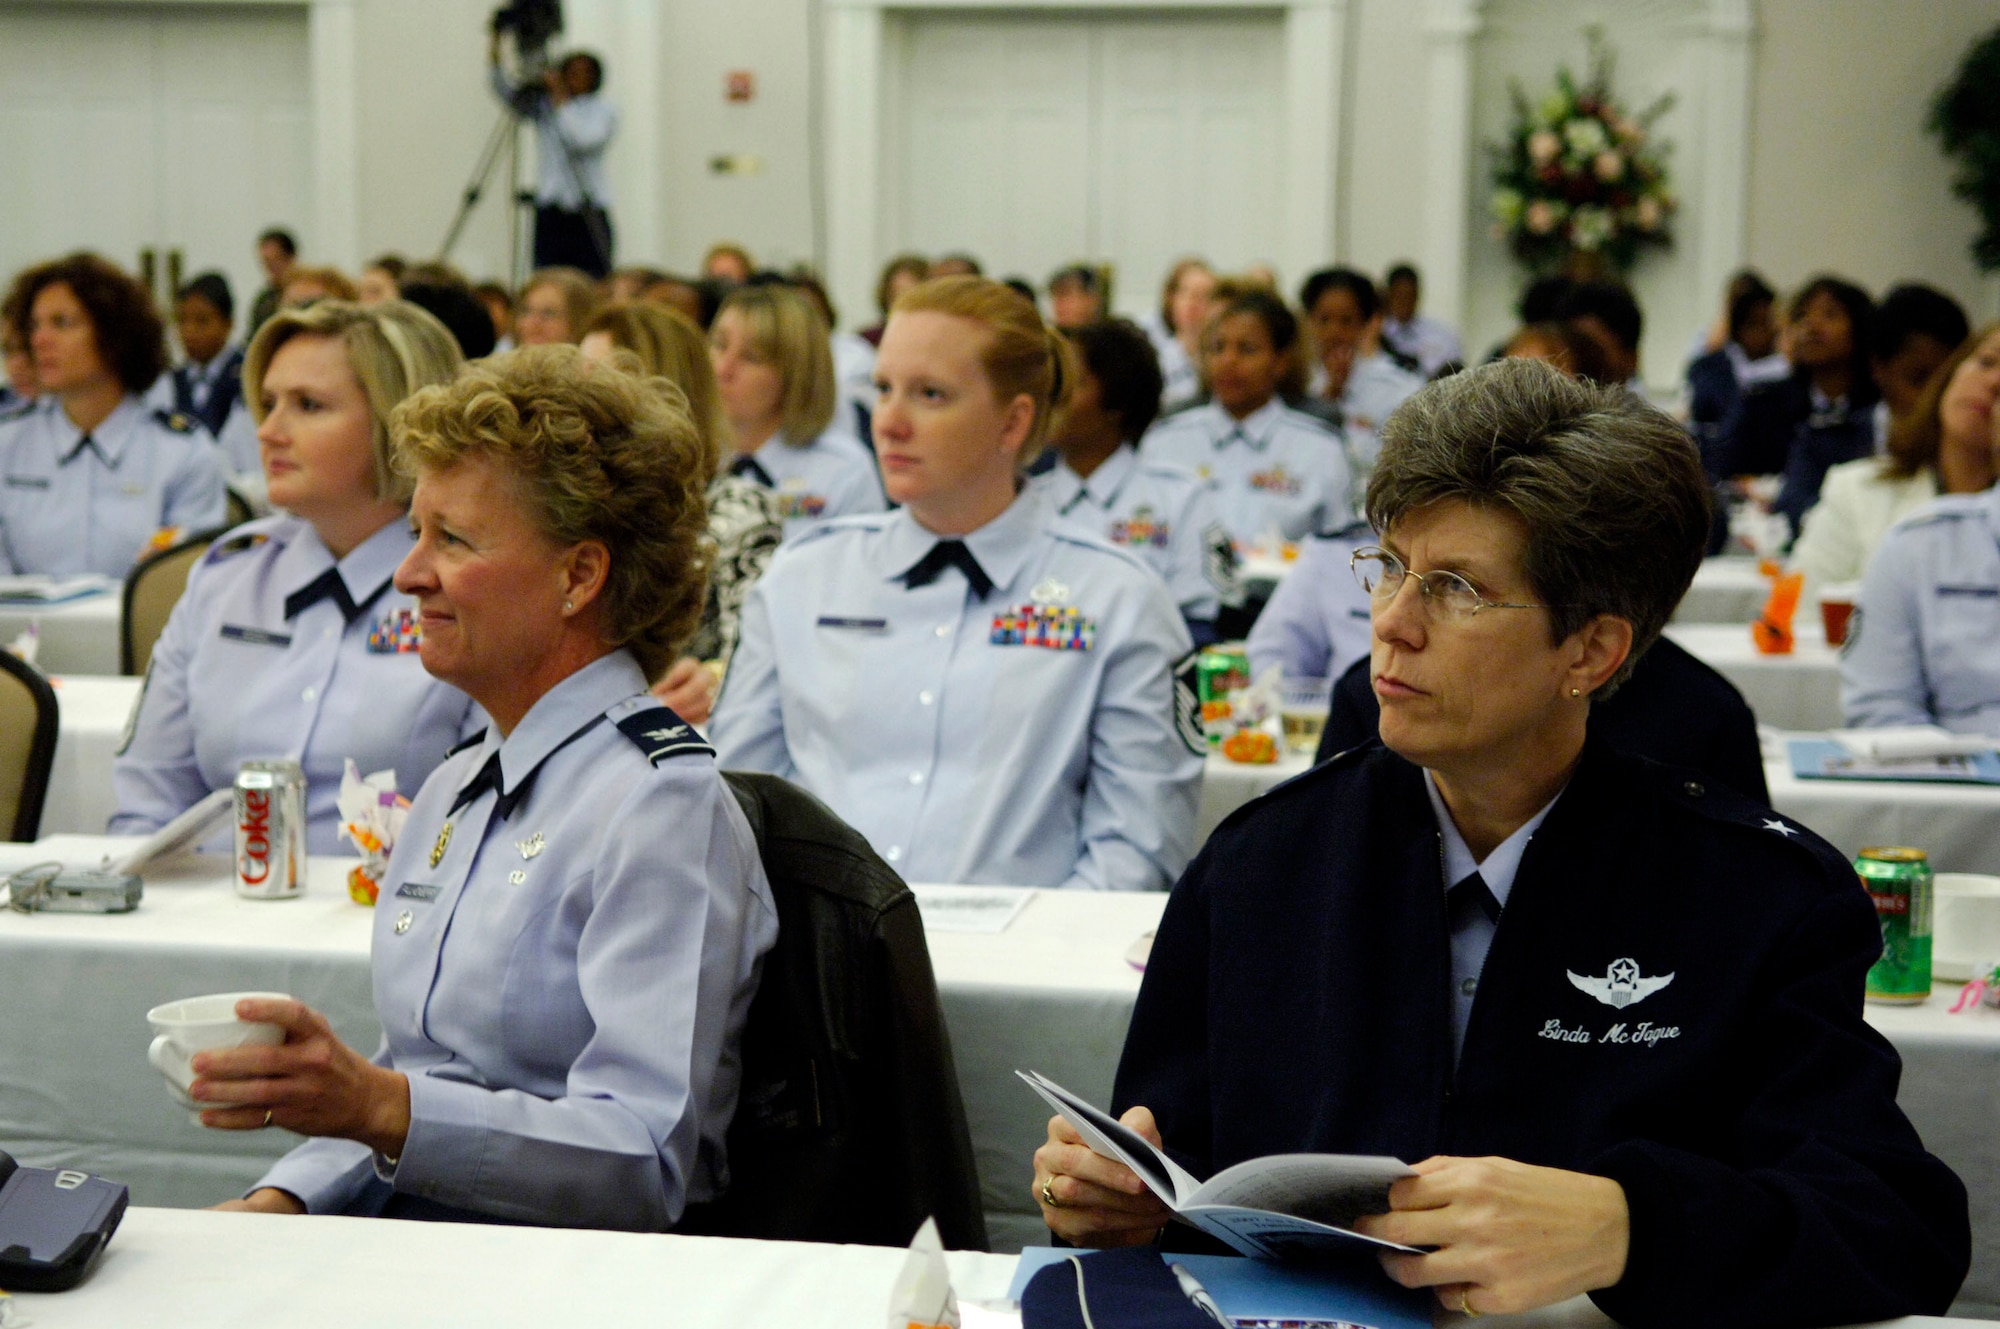 Air Force women of all ranks are in Springfield, Va., for the 2007 Air Force Heritage to Horizon Women's Training Symposium on Oct. 31. For the next three days, attendees will sit in on various forums and discussions, ranging in topics from professional development to women in combat. Guest speakers include both retired and active-duty Air Force women. (U.S. Air Force photo/Staff Sgt. Suzanne M. Day)